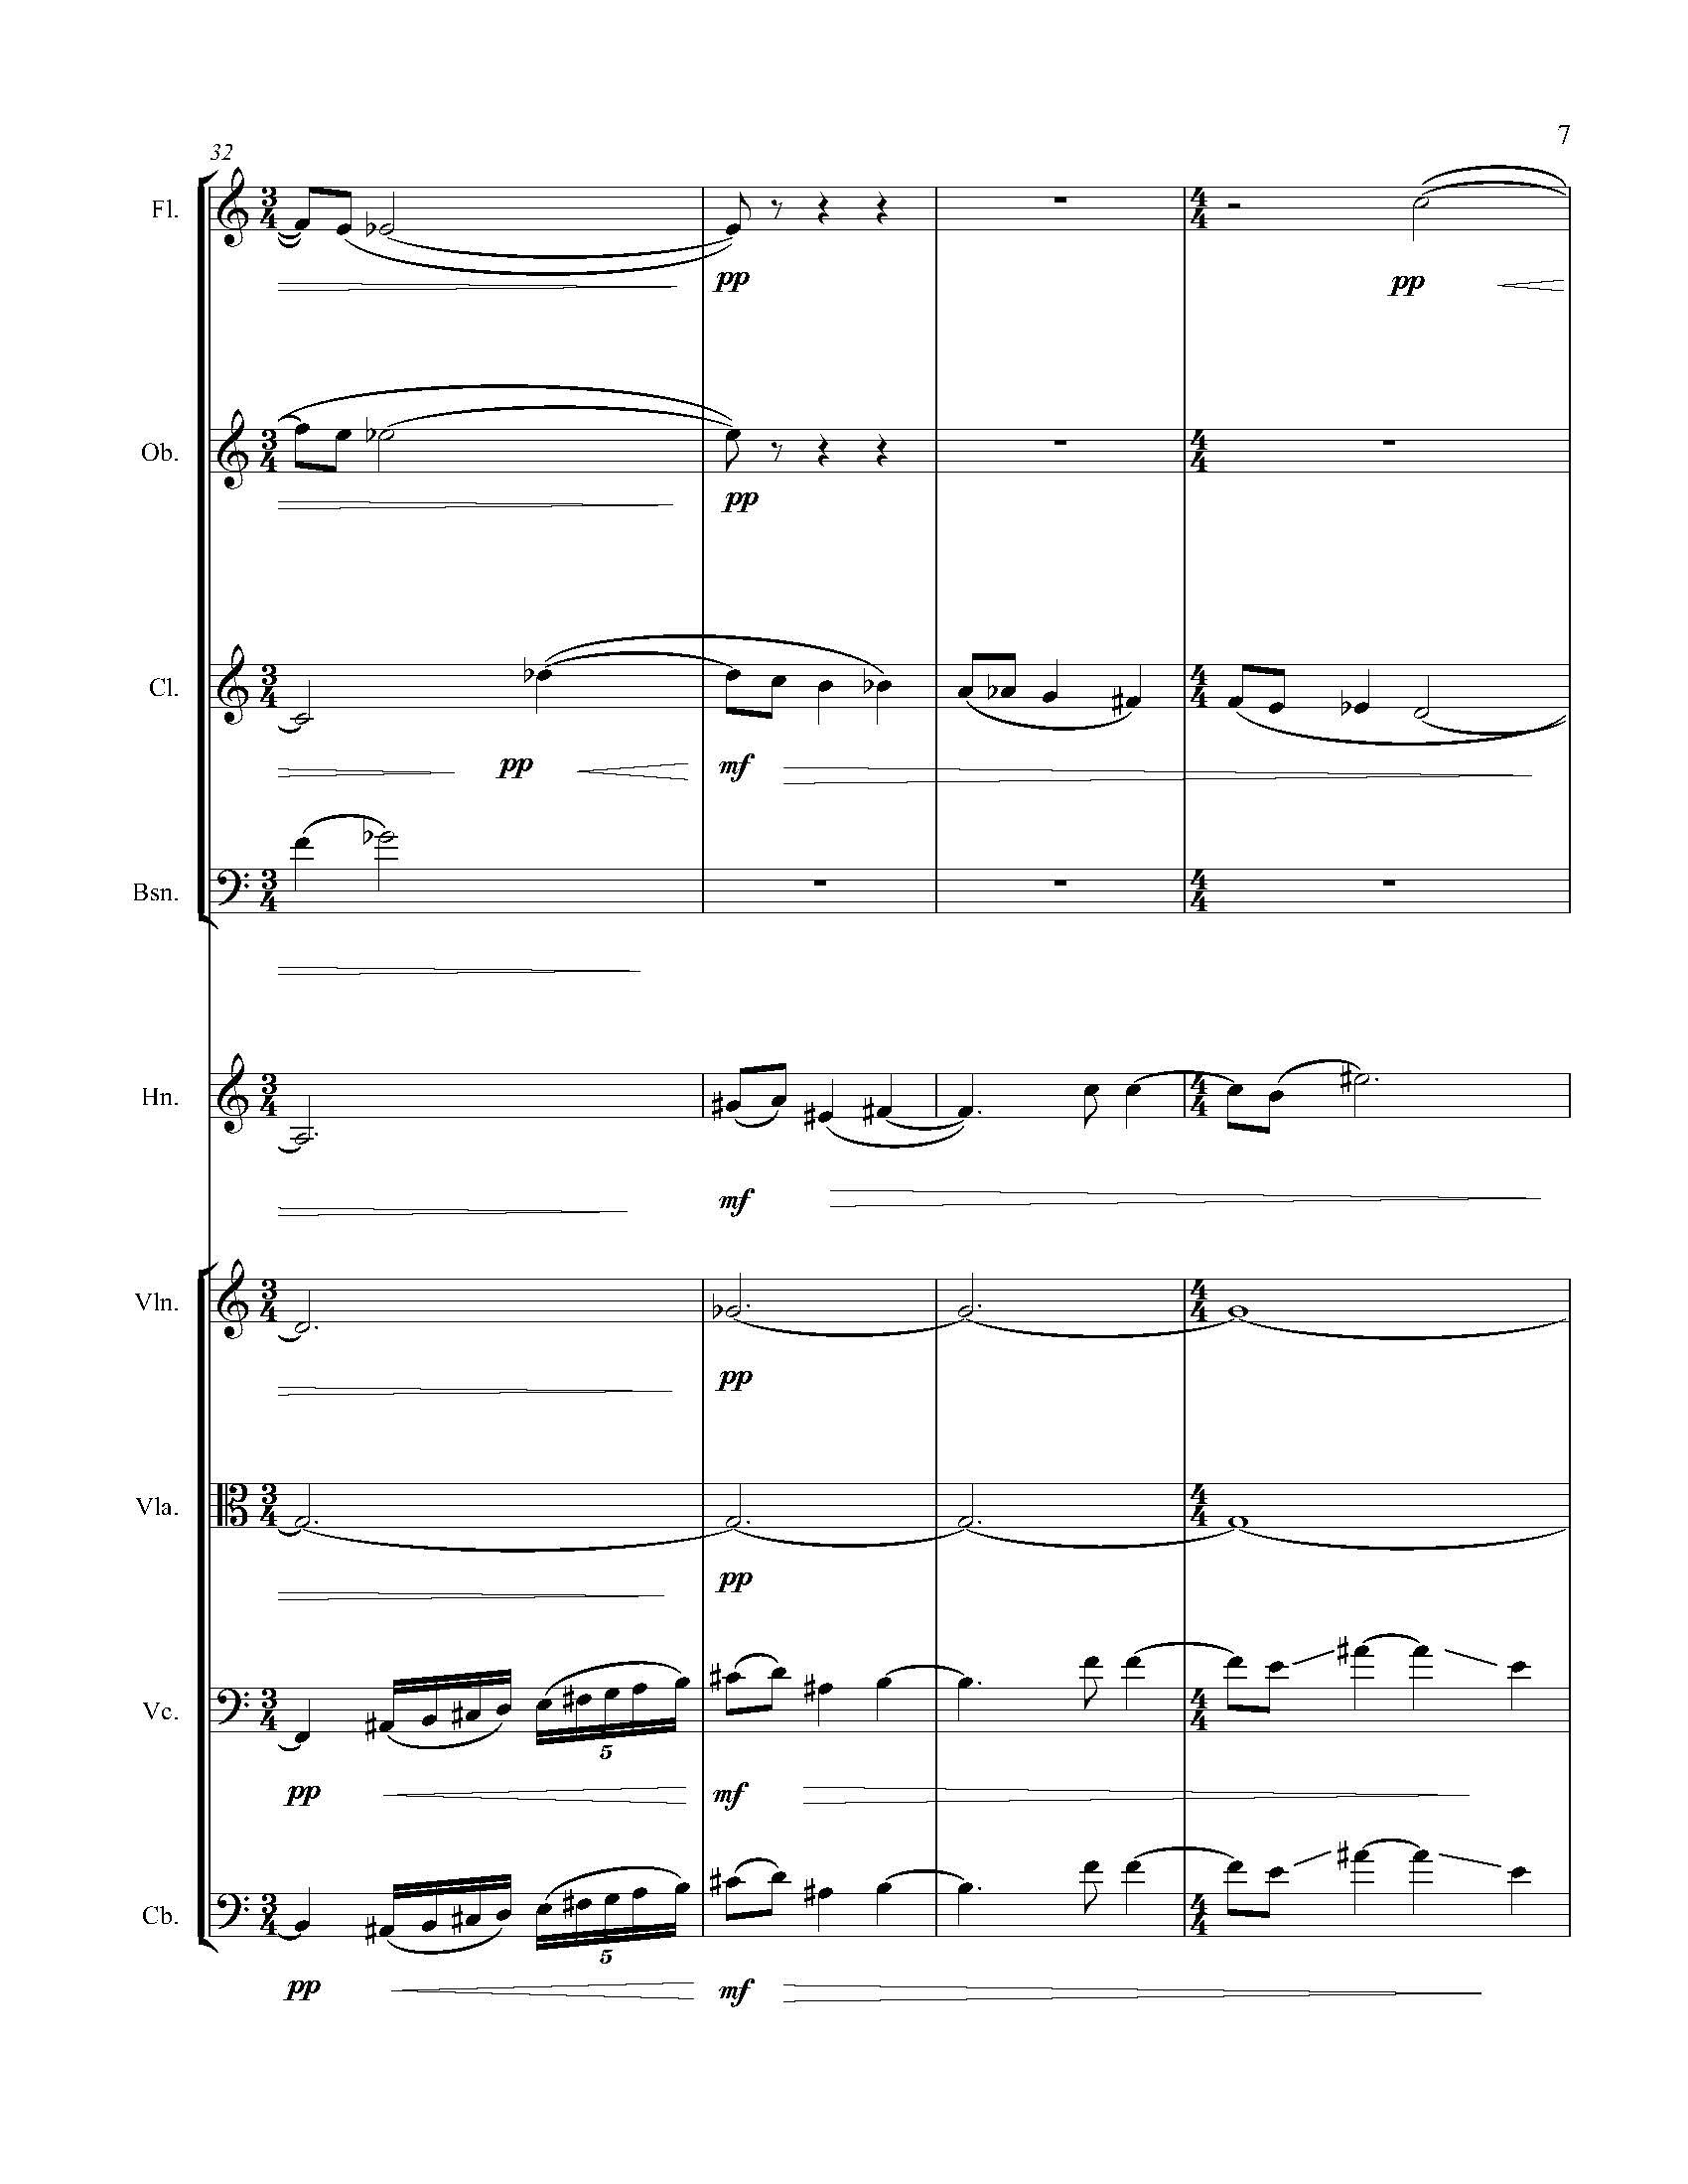 In Search of a Bird - Complete Score_Page_13.jpg